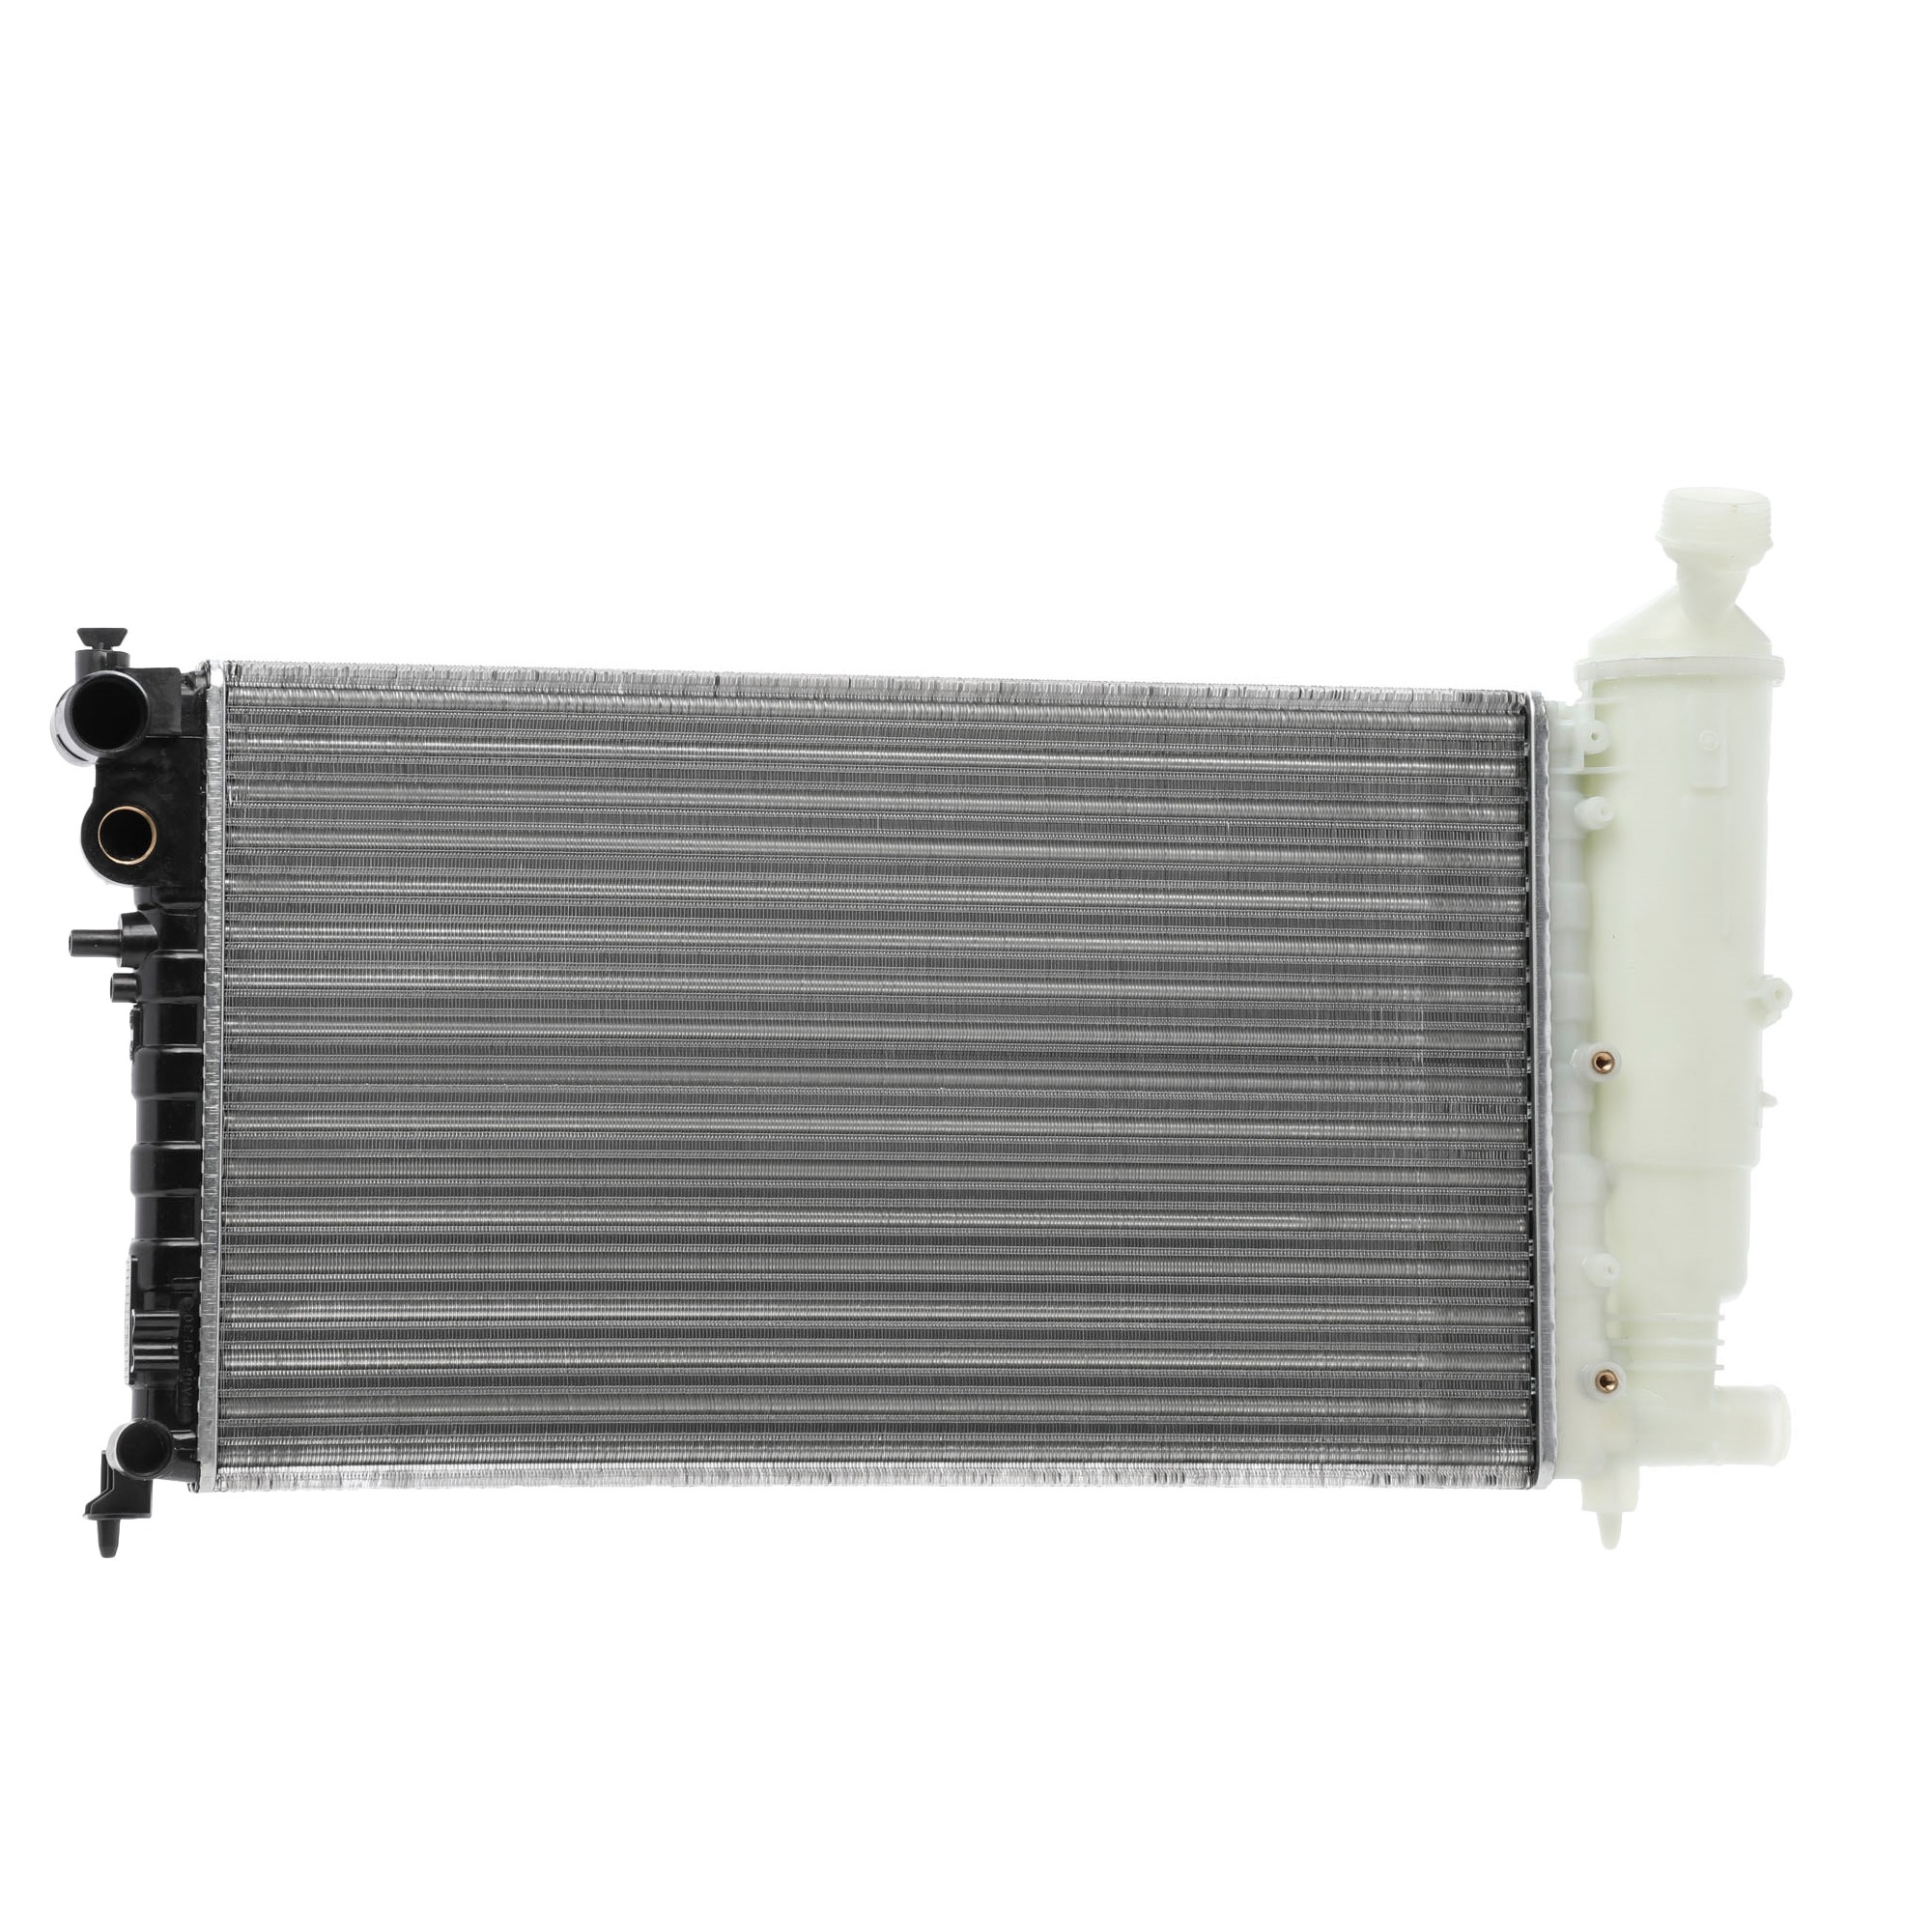 STARK SKRD-0120756 Engine radiator Aluminium, Plastic, for vehicles with/without air conditioning, Automatic Transmission